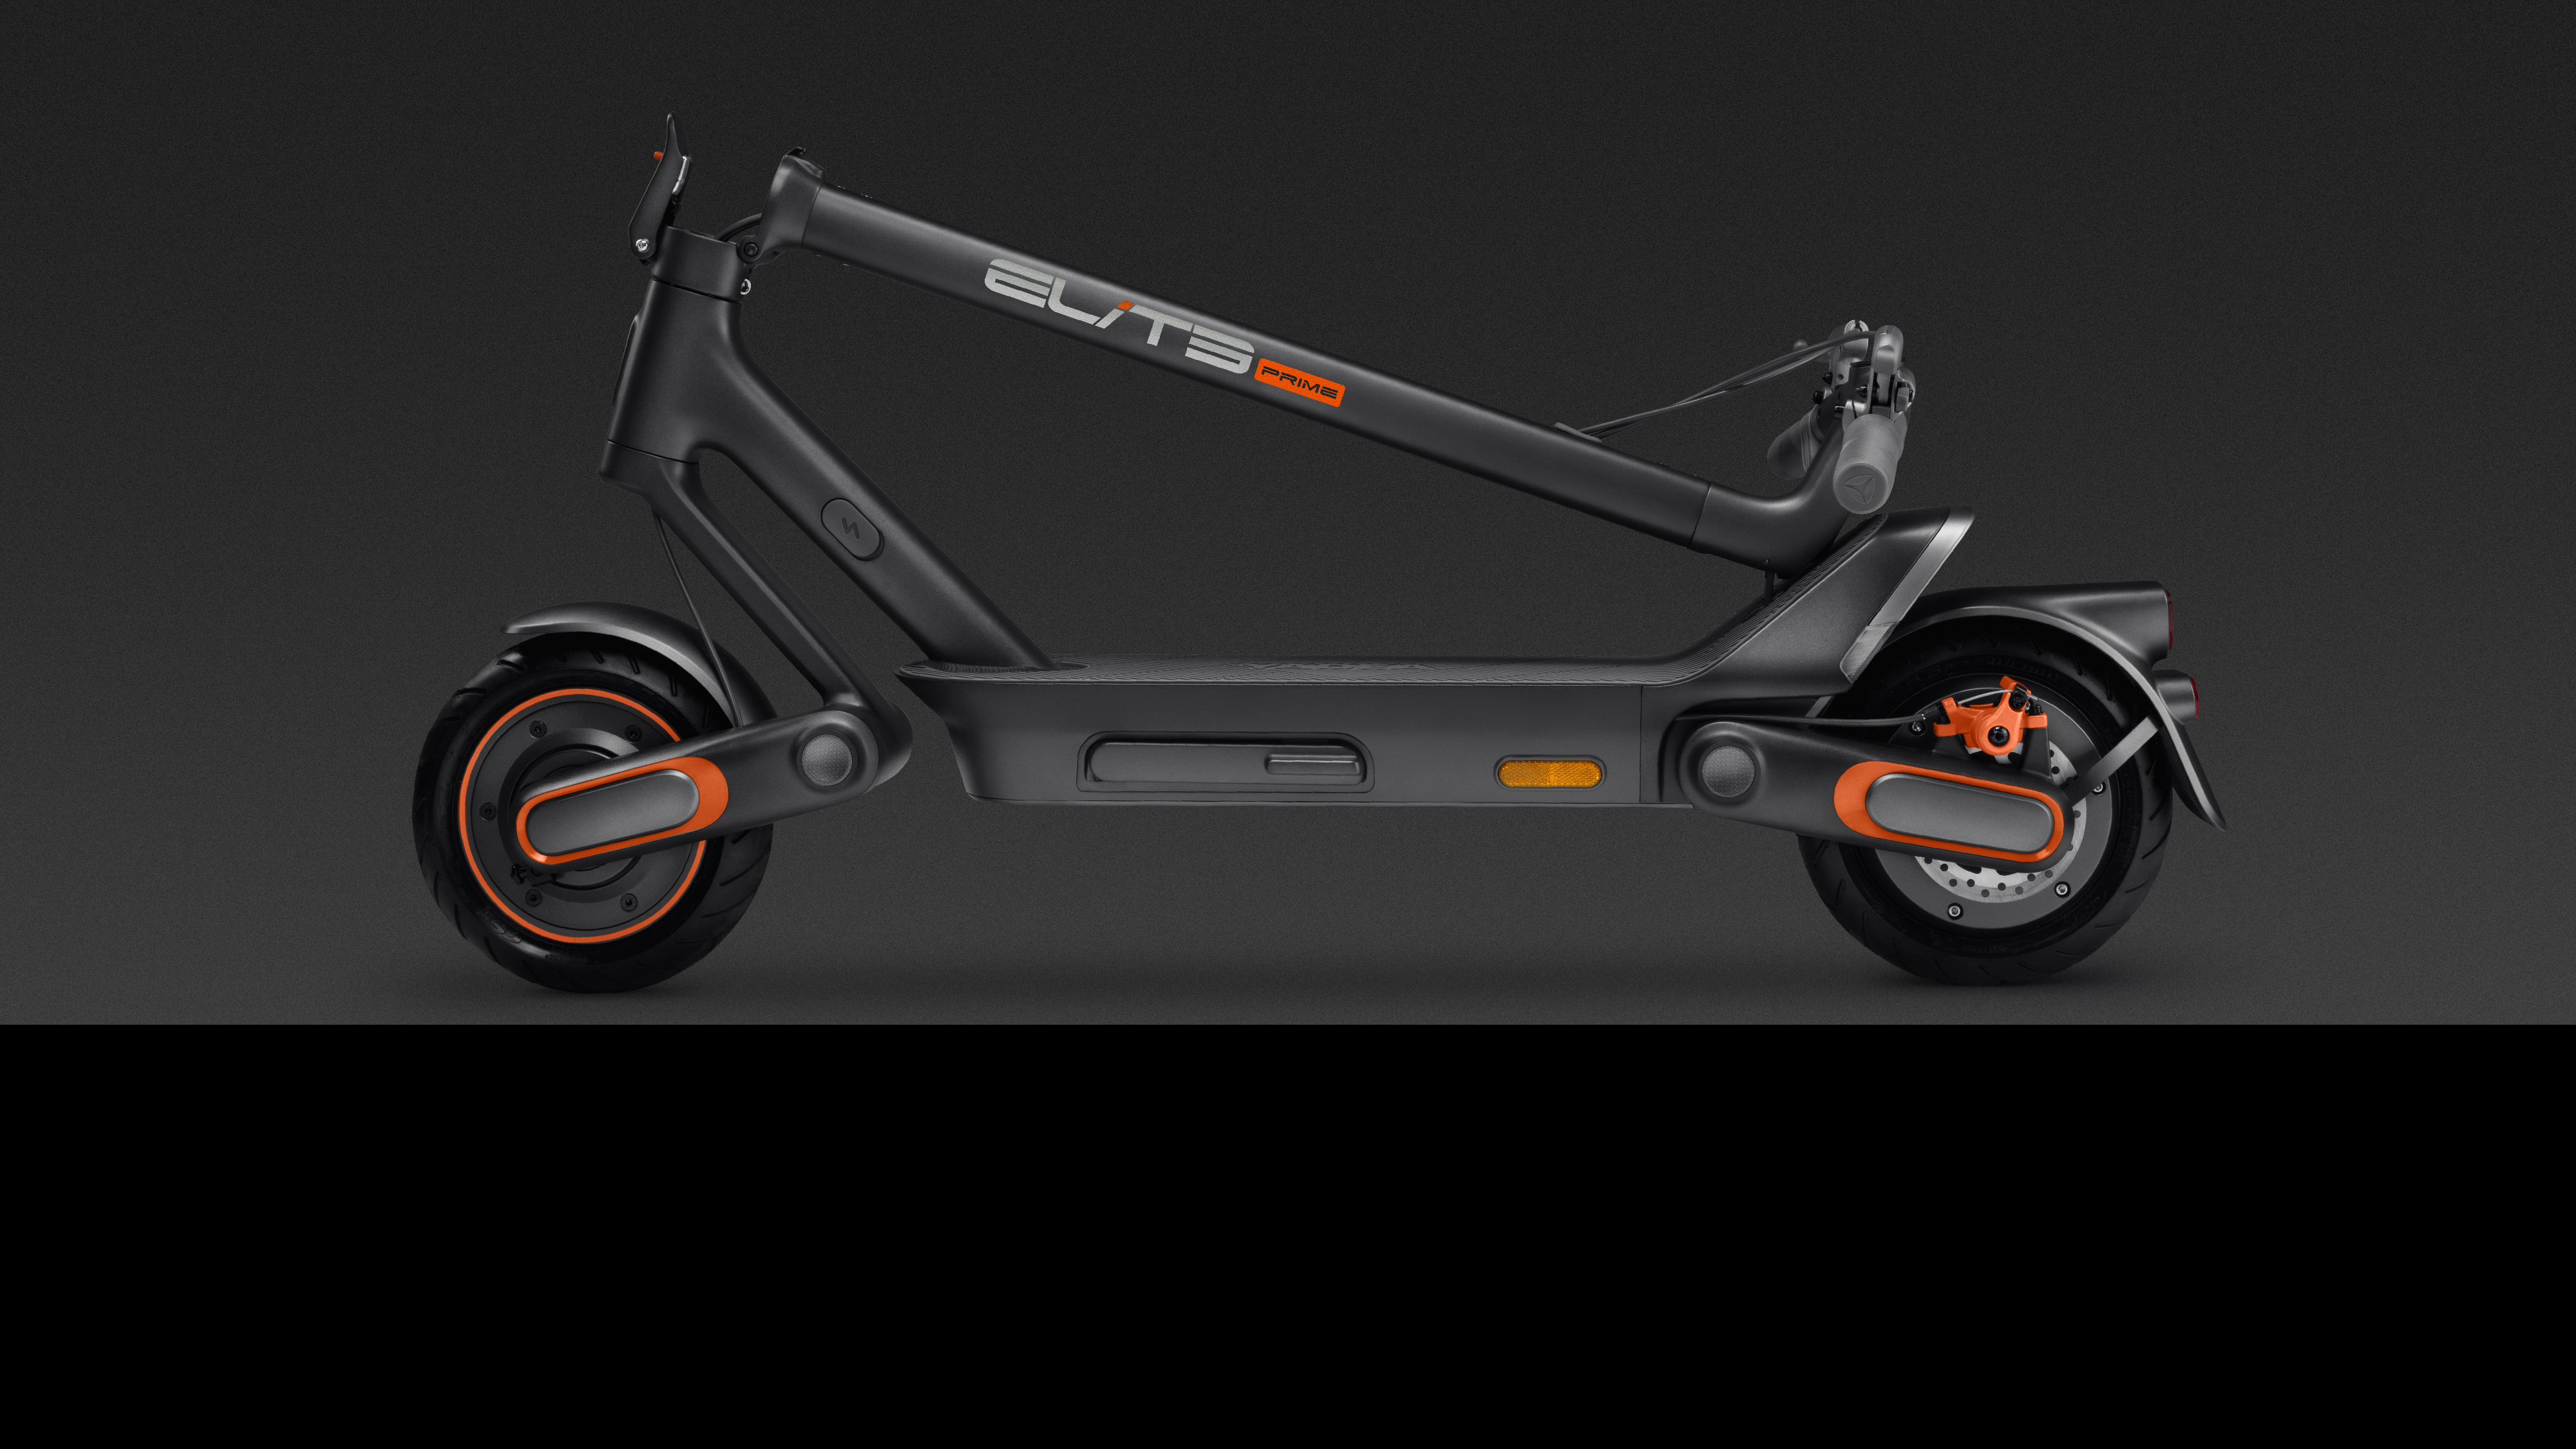 Yadea Elite Prime E-Scooter Launched With a Light Frame and